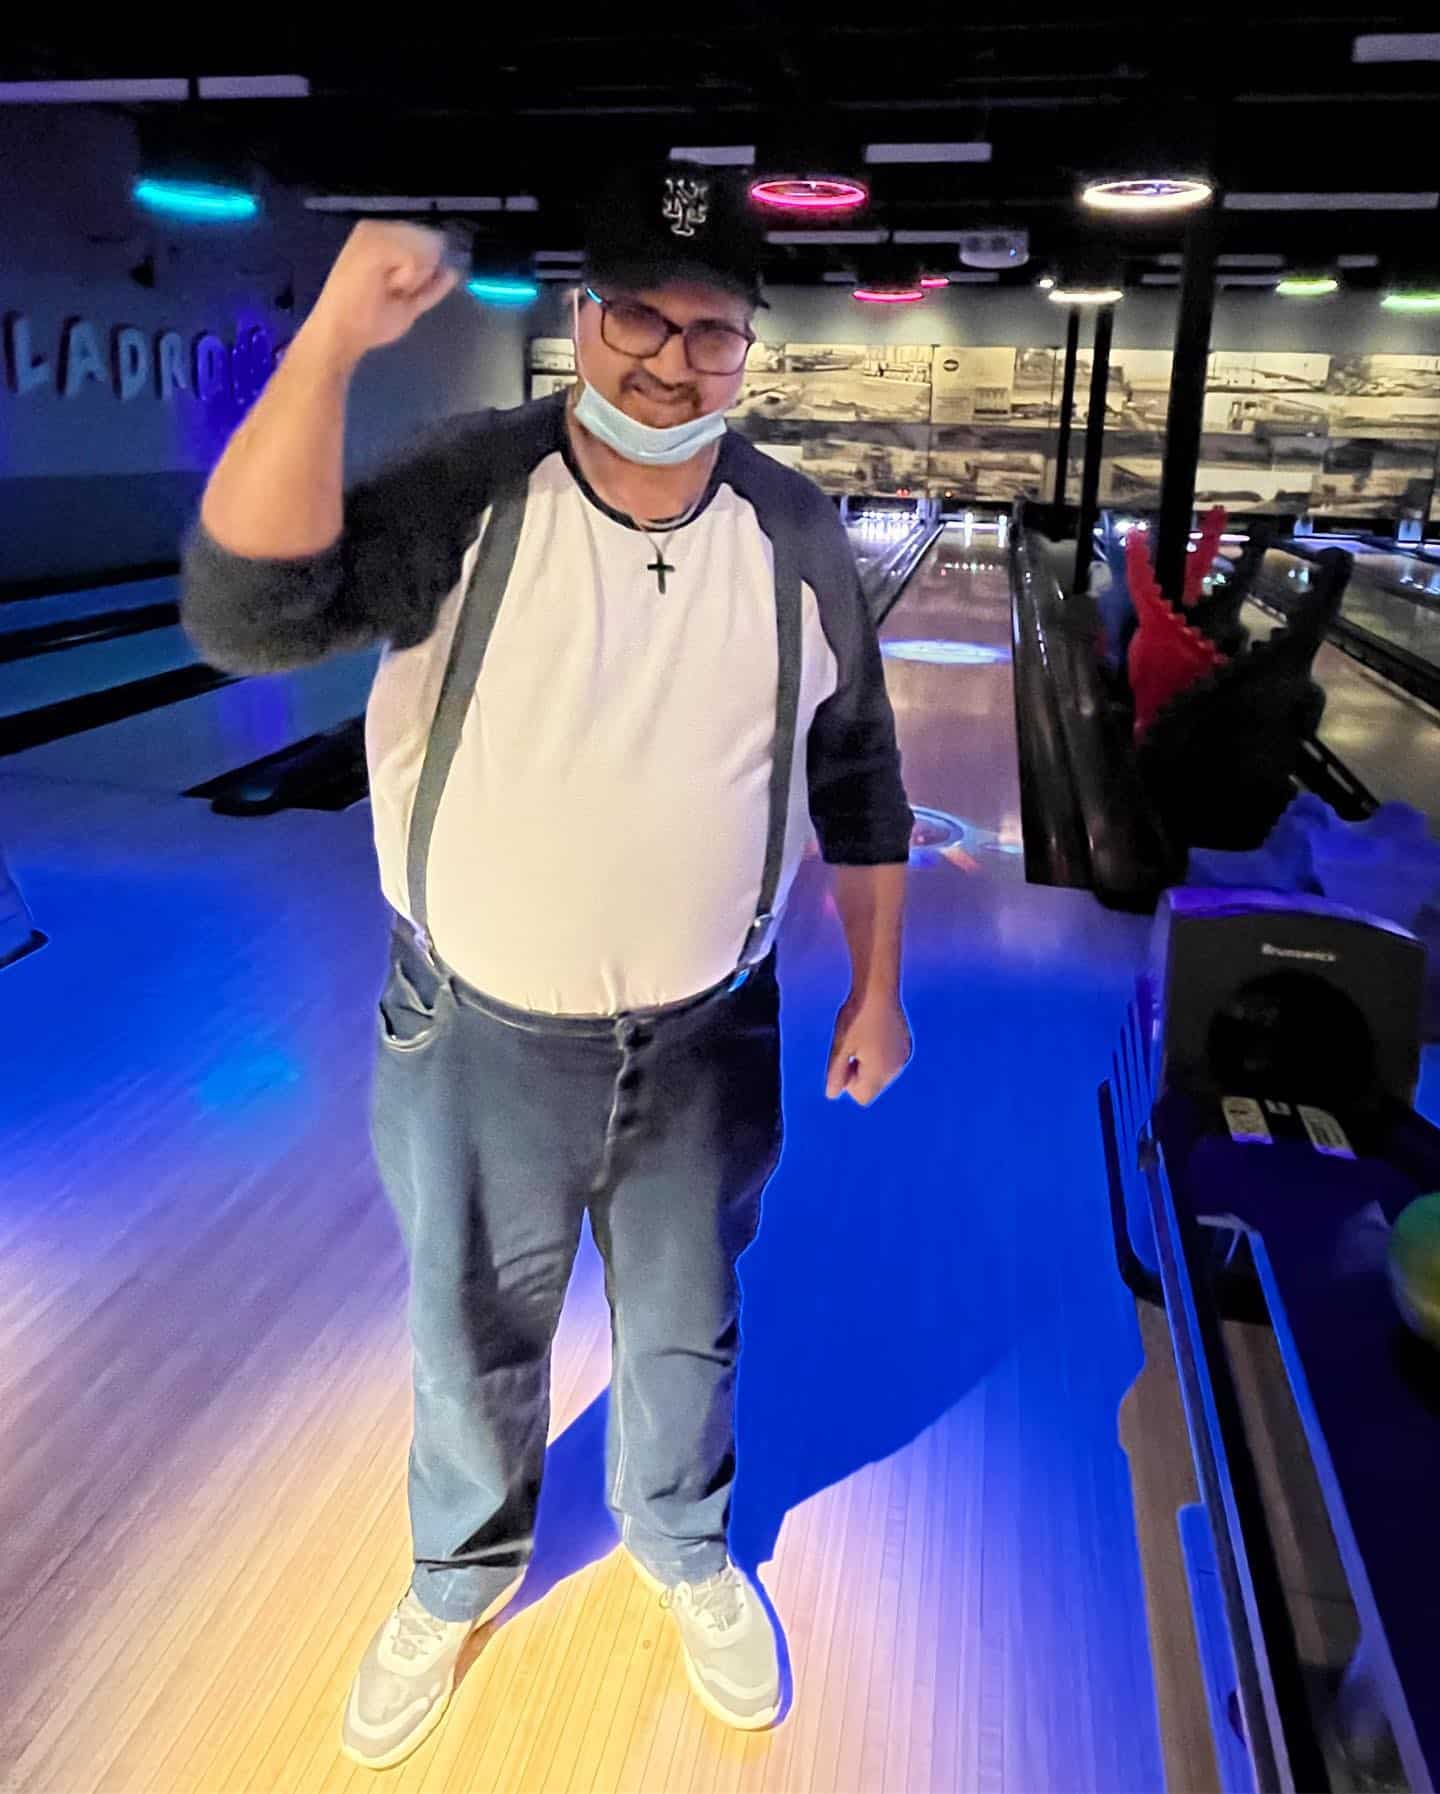 An intellectually disabled man standing in a bowling alley holding his right fist up.